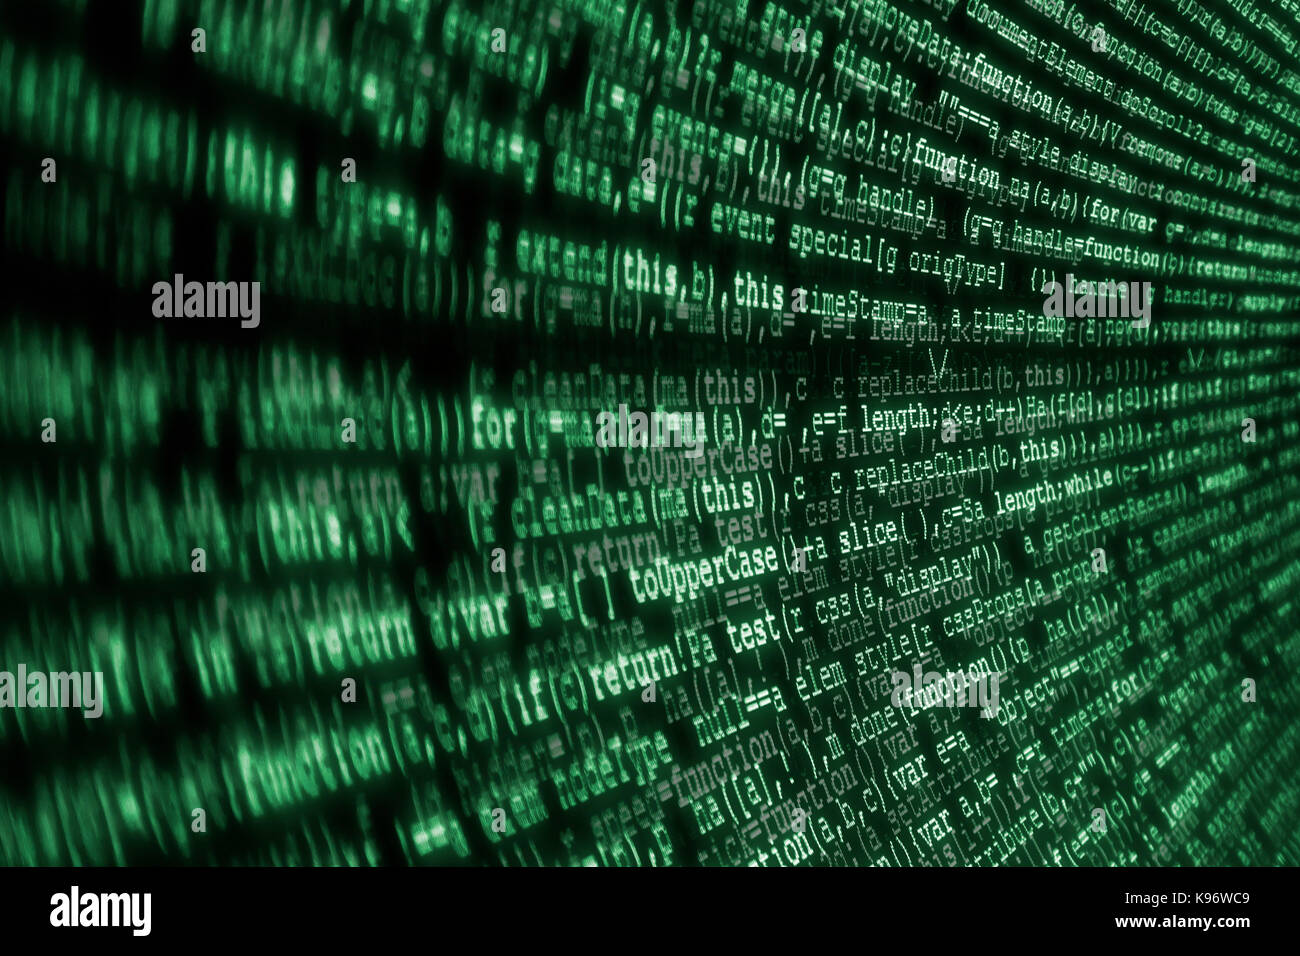 Internet concept, javascript code. Language web pages, computers, network, web. Black background with green text like old CRT monitors, matrix style. Stock Photo